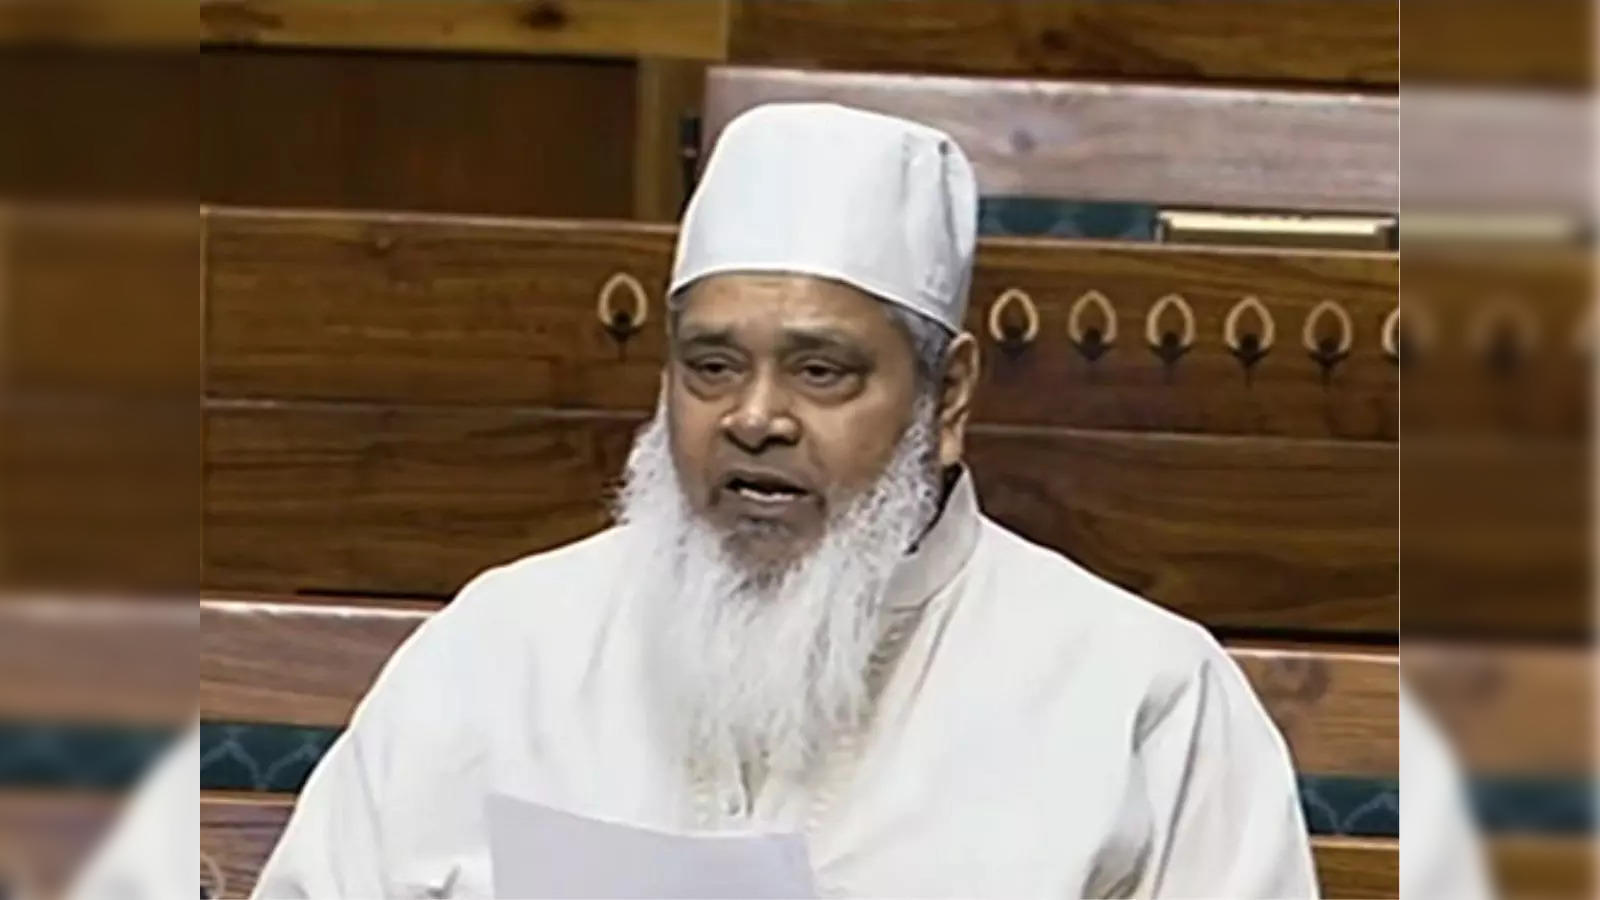 Muslim people to avoid travel by train and remain at home during Ram Mandir  inauguration: Badruddin Ajmal - The Economic Times